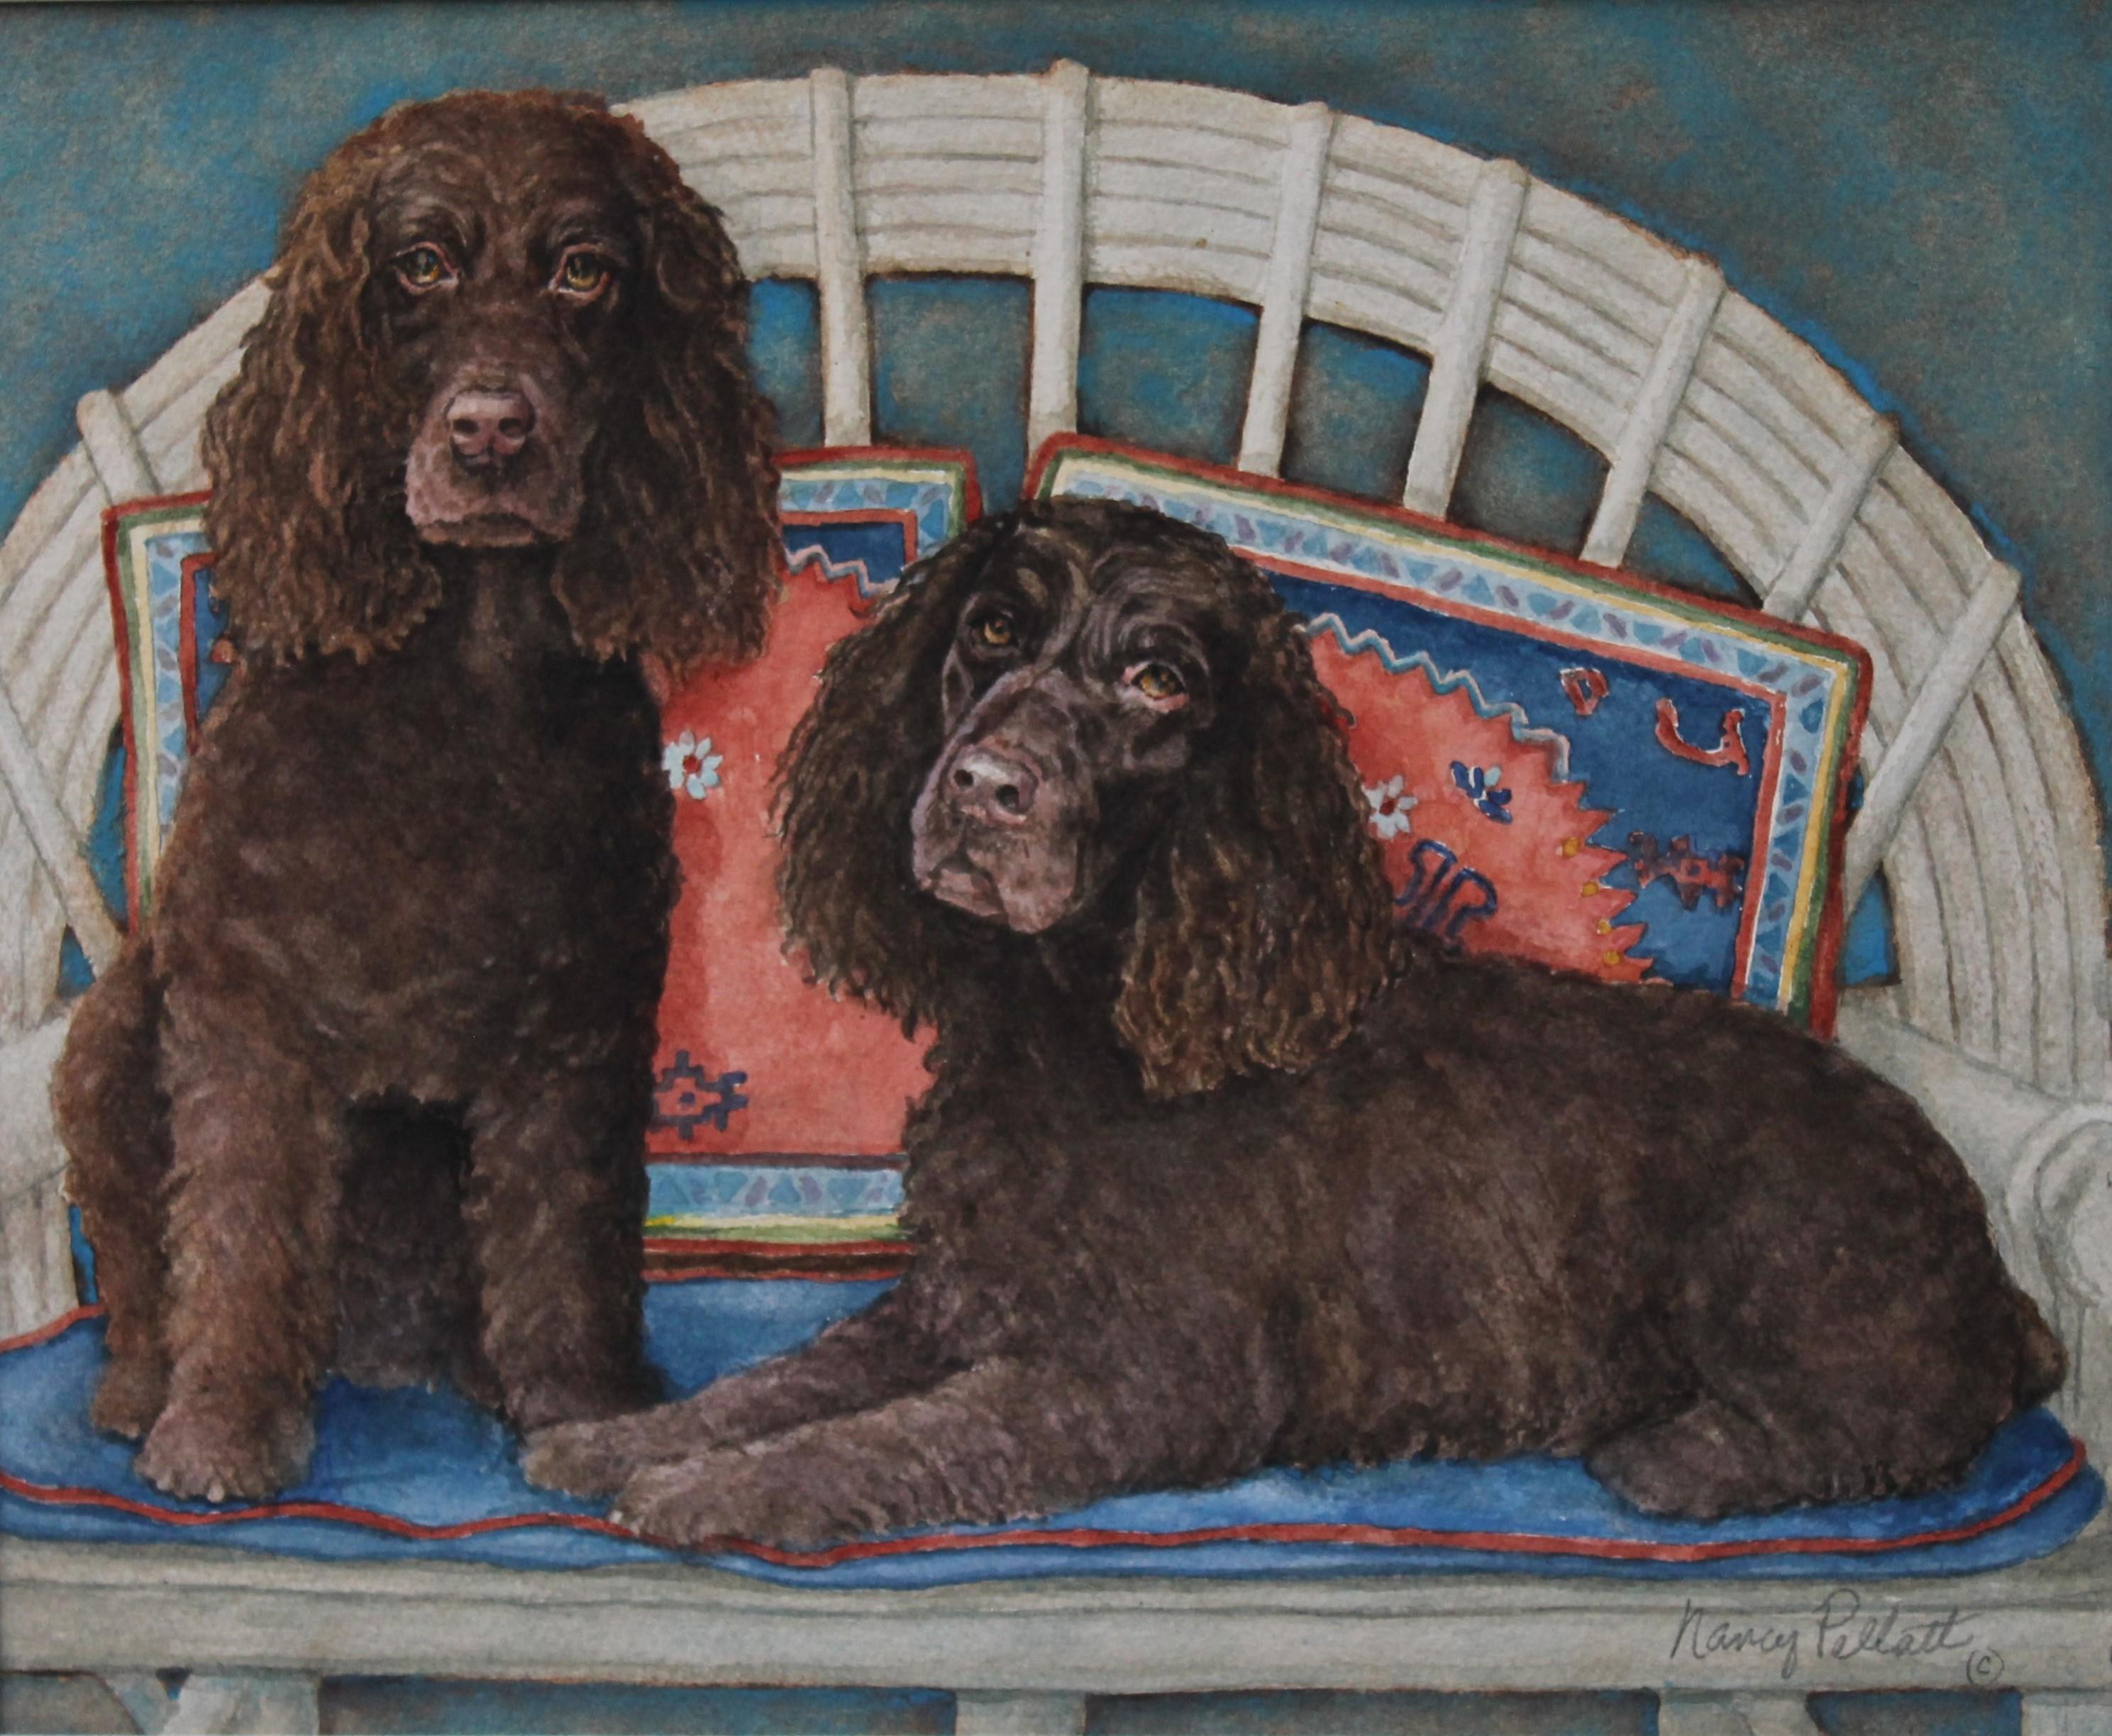 Nancy Pellatt Animal Art - Classic detailed dog painting of Spaniels on chair with a rich blue background